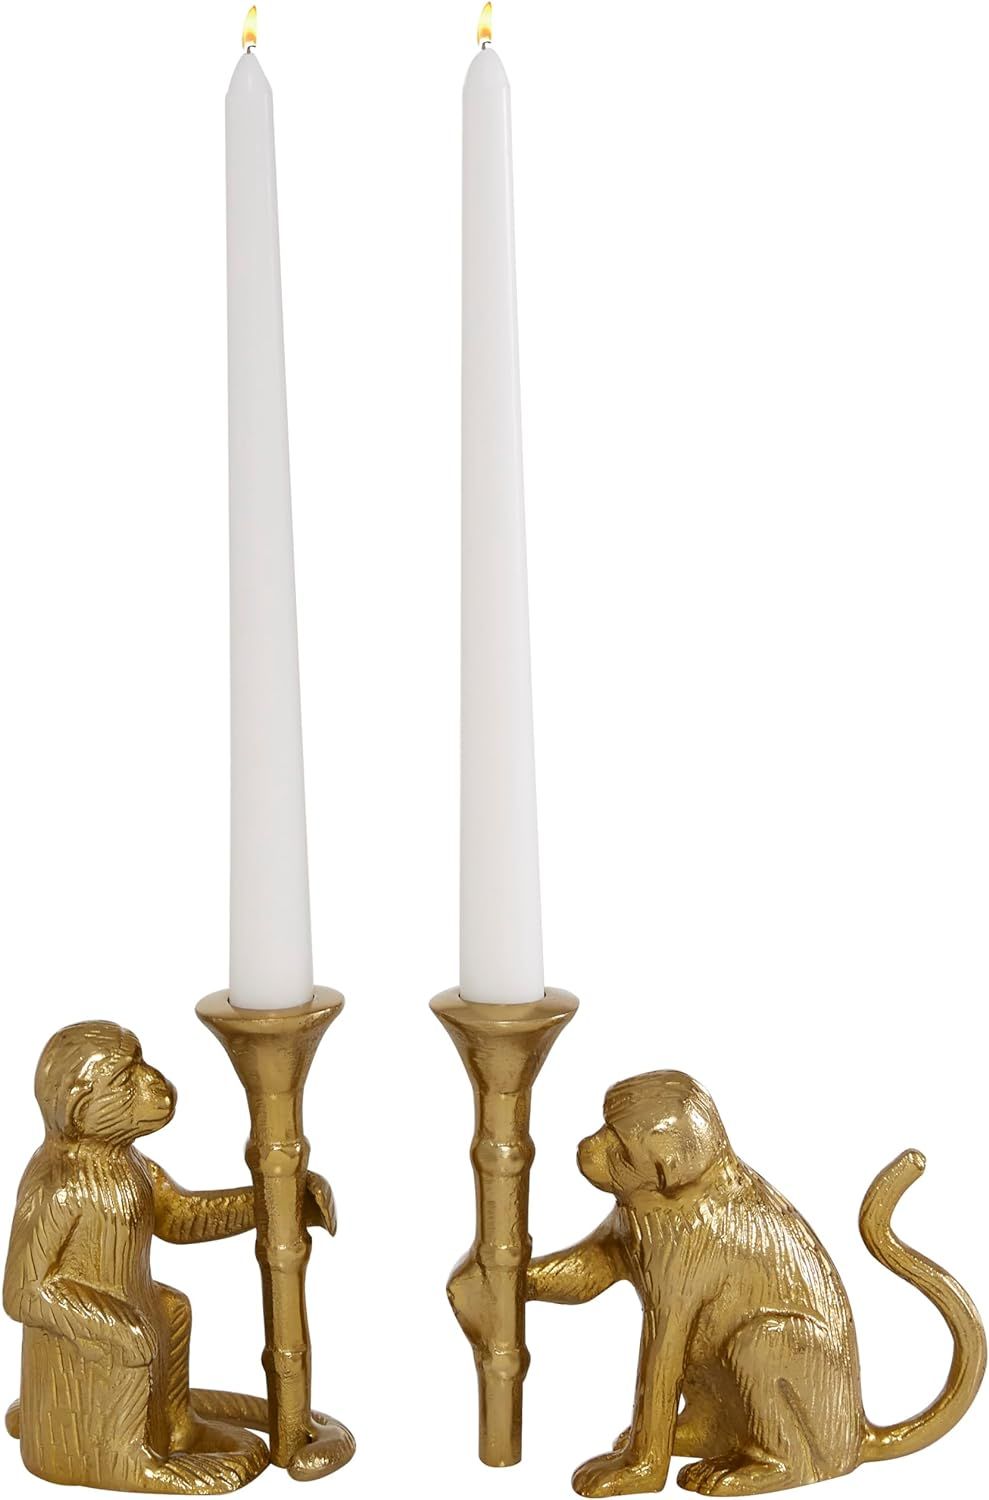 Deco 79 Aluminum Solid Candle Holder, Set of 2 3"W, 5"H, Gold | Amazon (US)